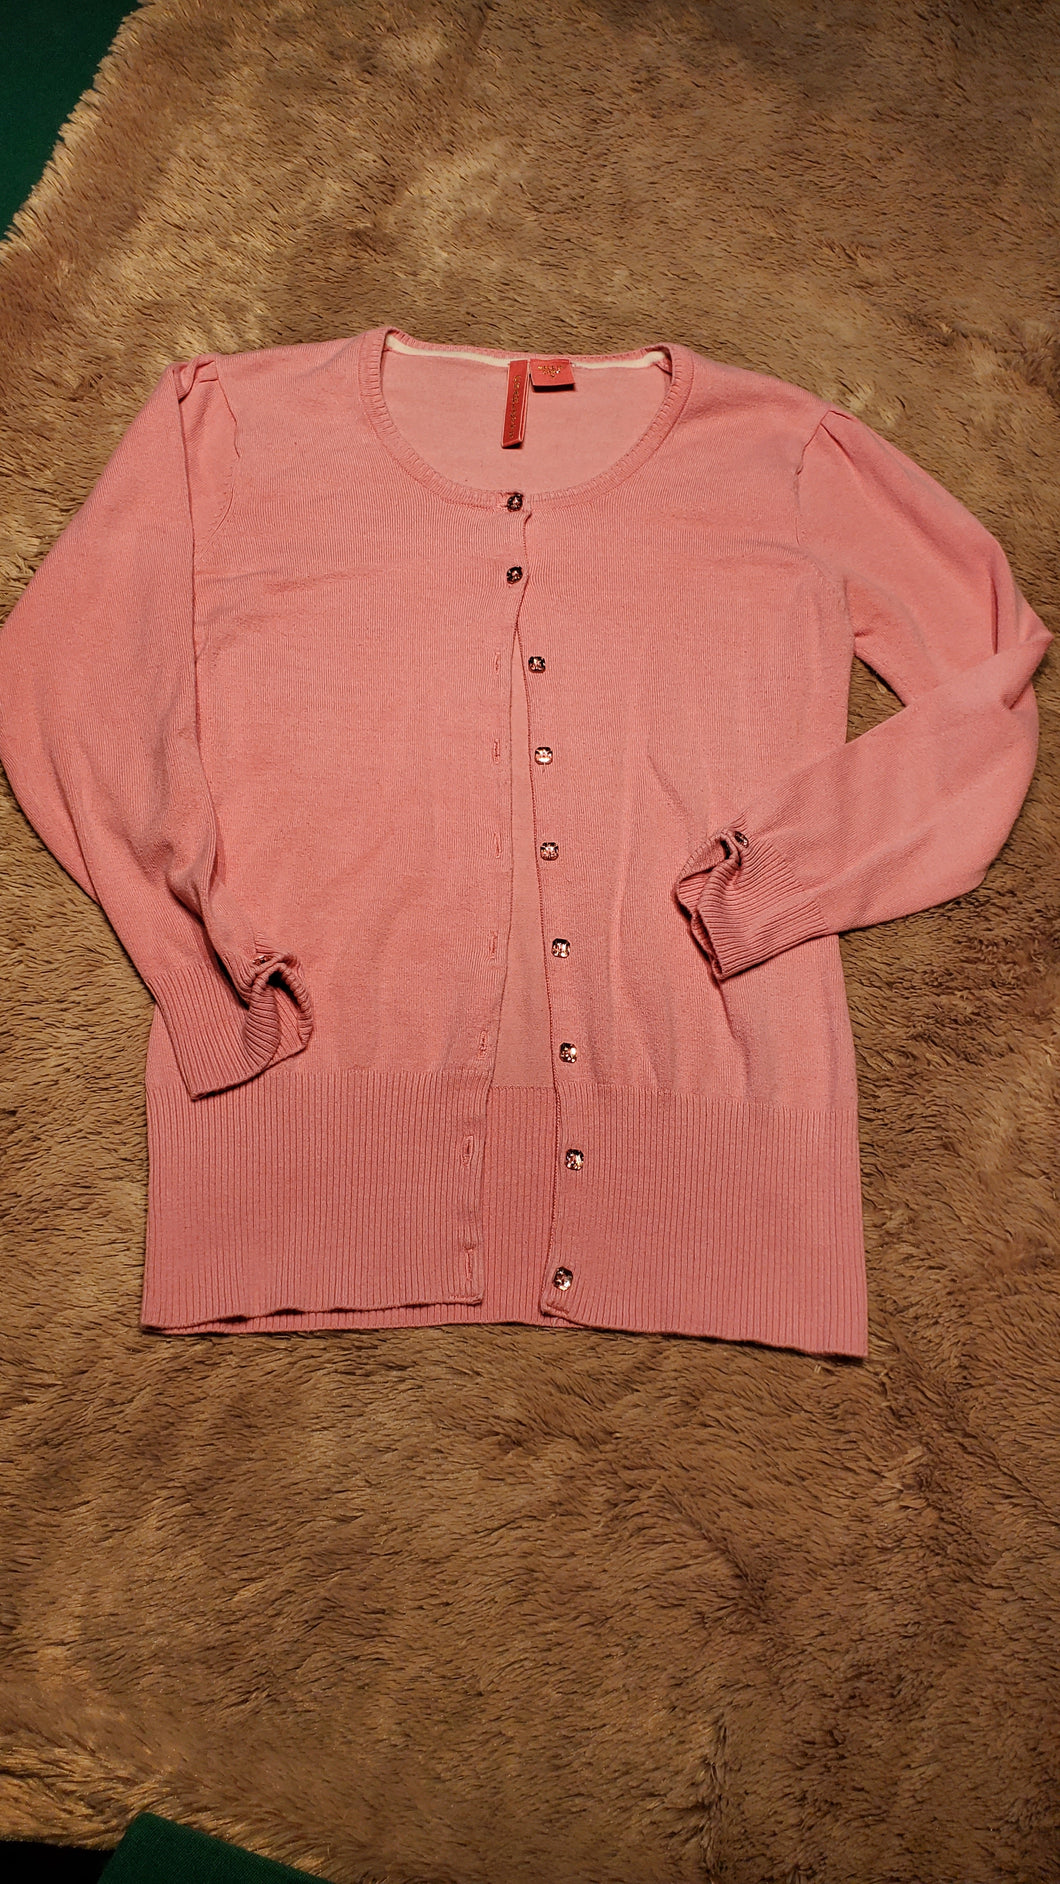 Charlotte button cardigan sweater, size small, pink, jewel buttons Adult Small